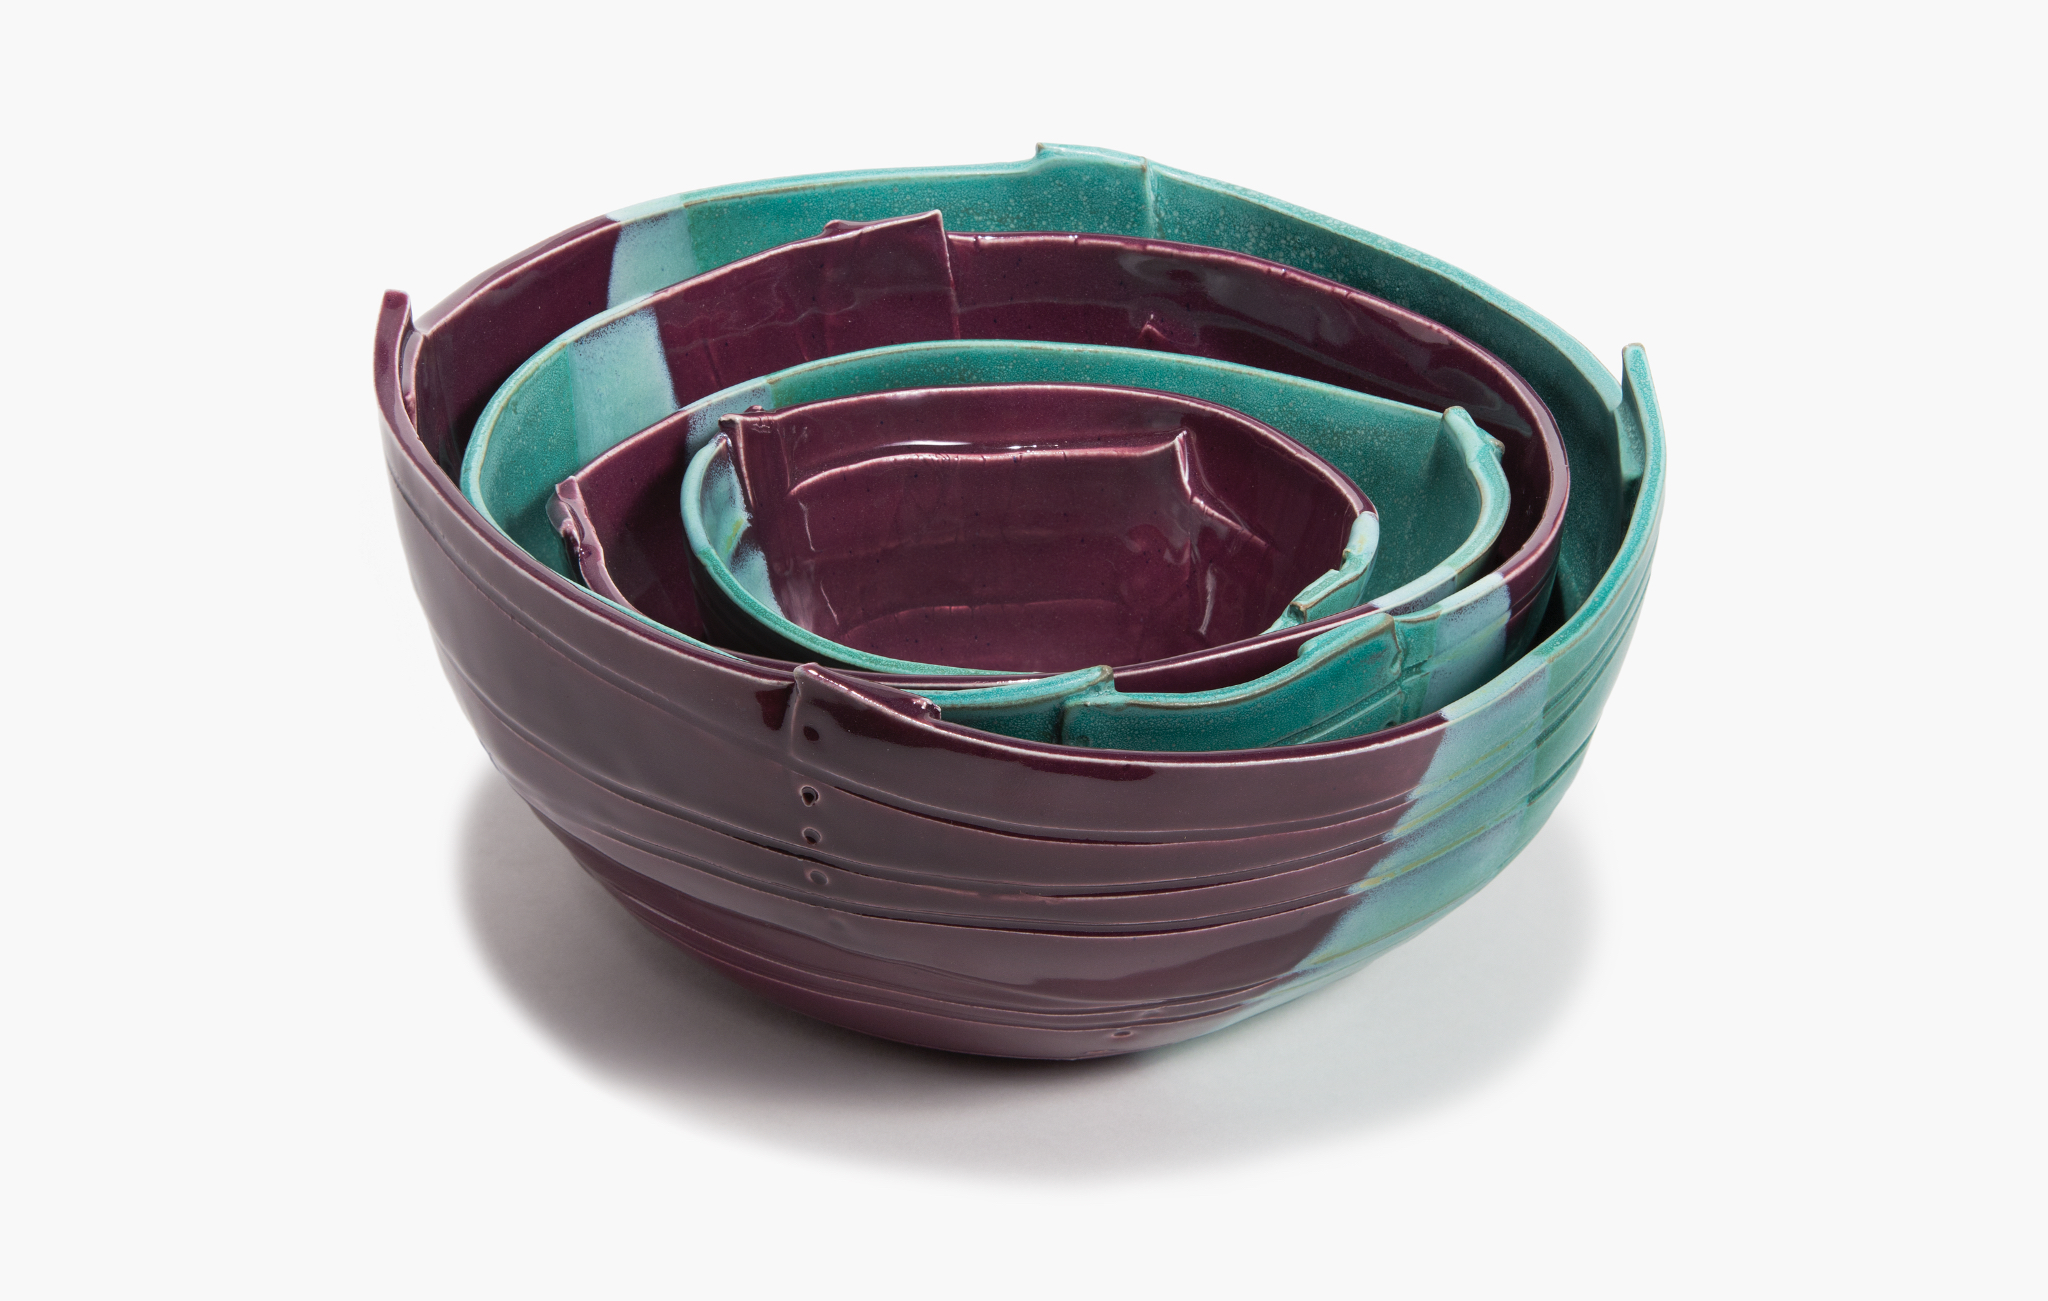 Nesting Bowls in Teal and Plum